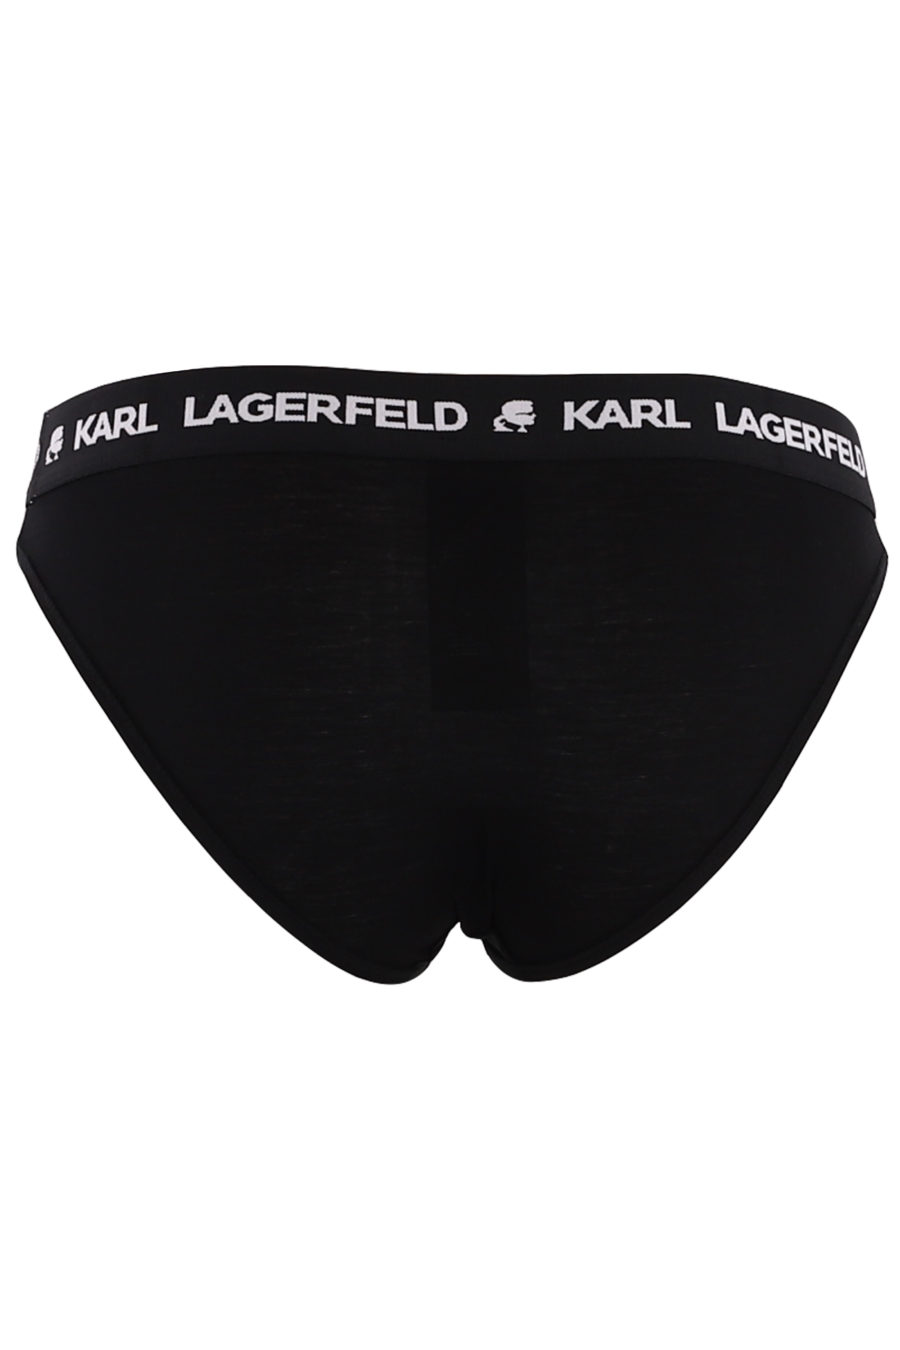 Pack of two black knickers with logo - 309e2642f8122bc7055766379e6358c3666ea5a7